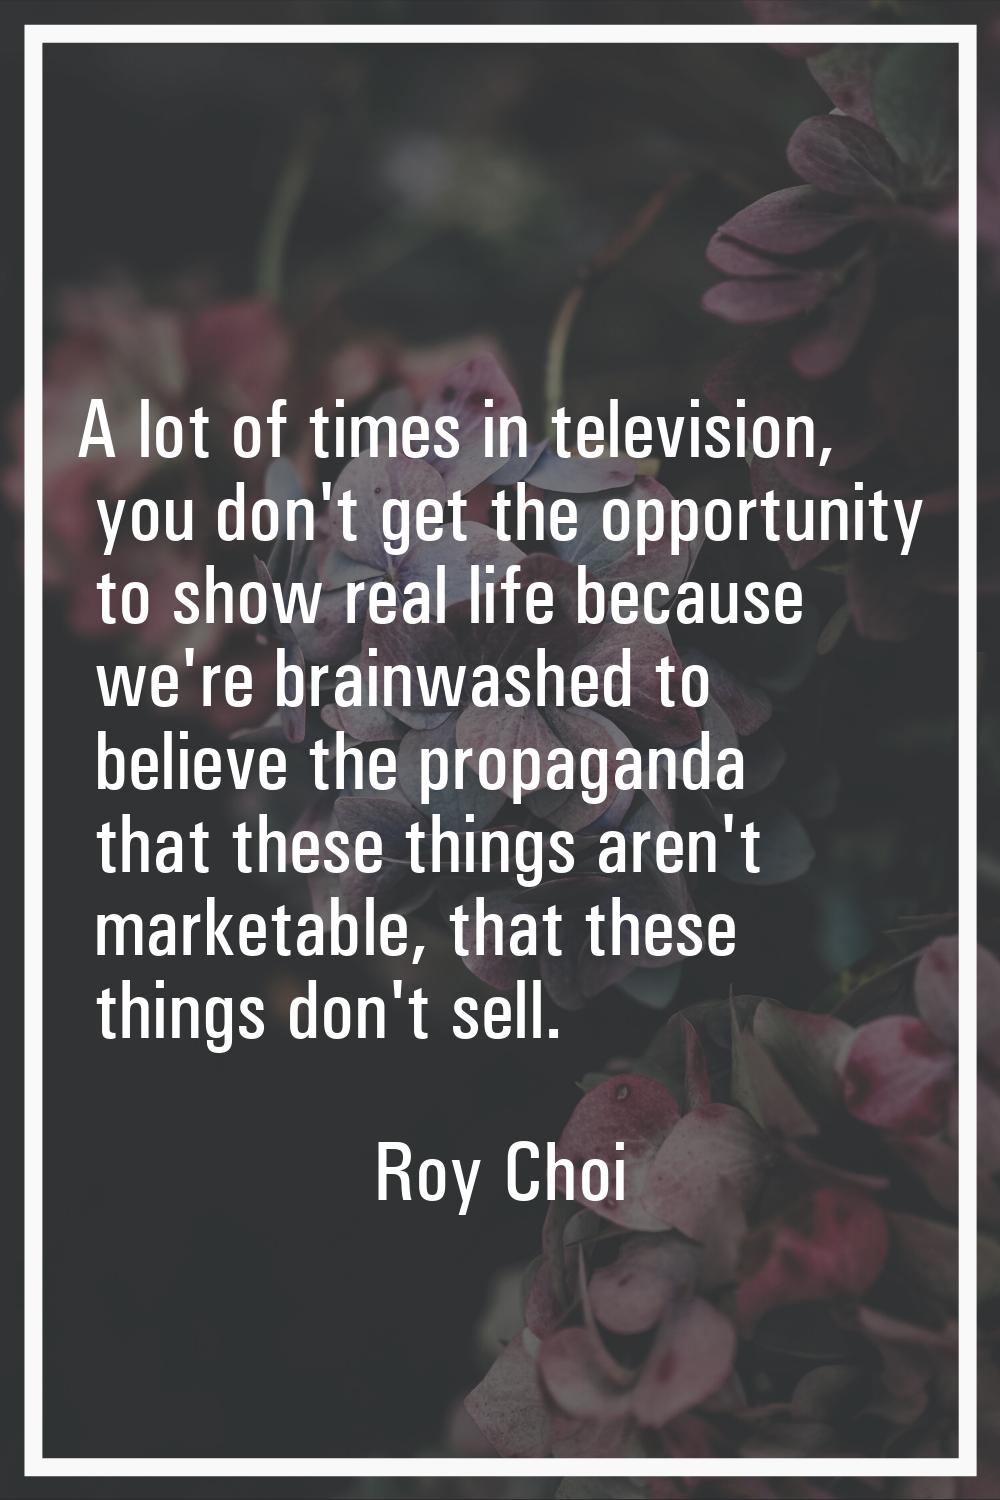 A lot of times in television, you don't get the opportunity to show real life because we're brainwa